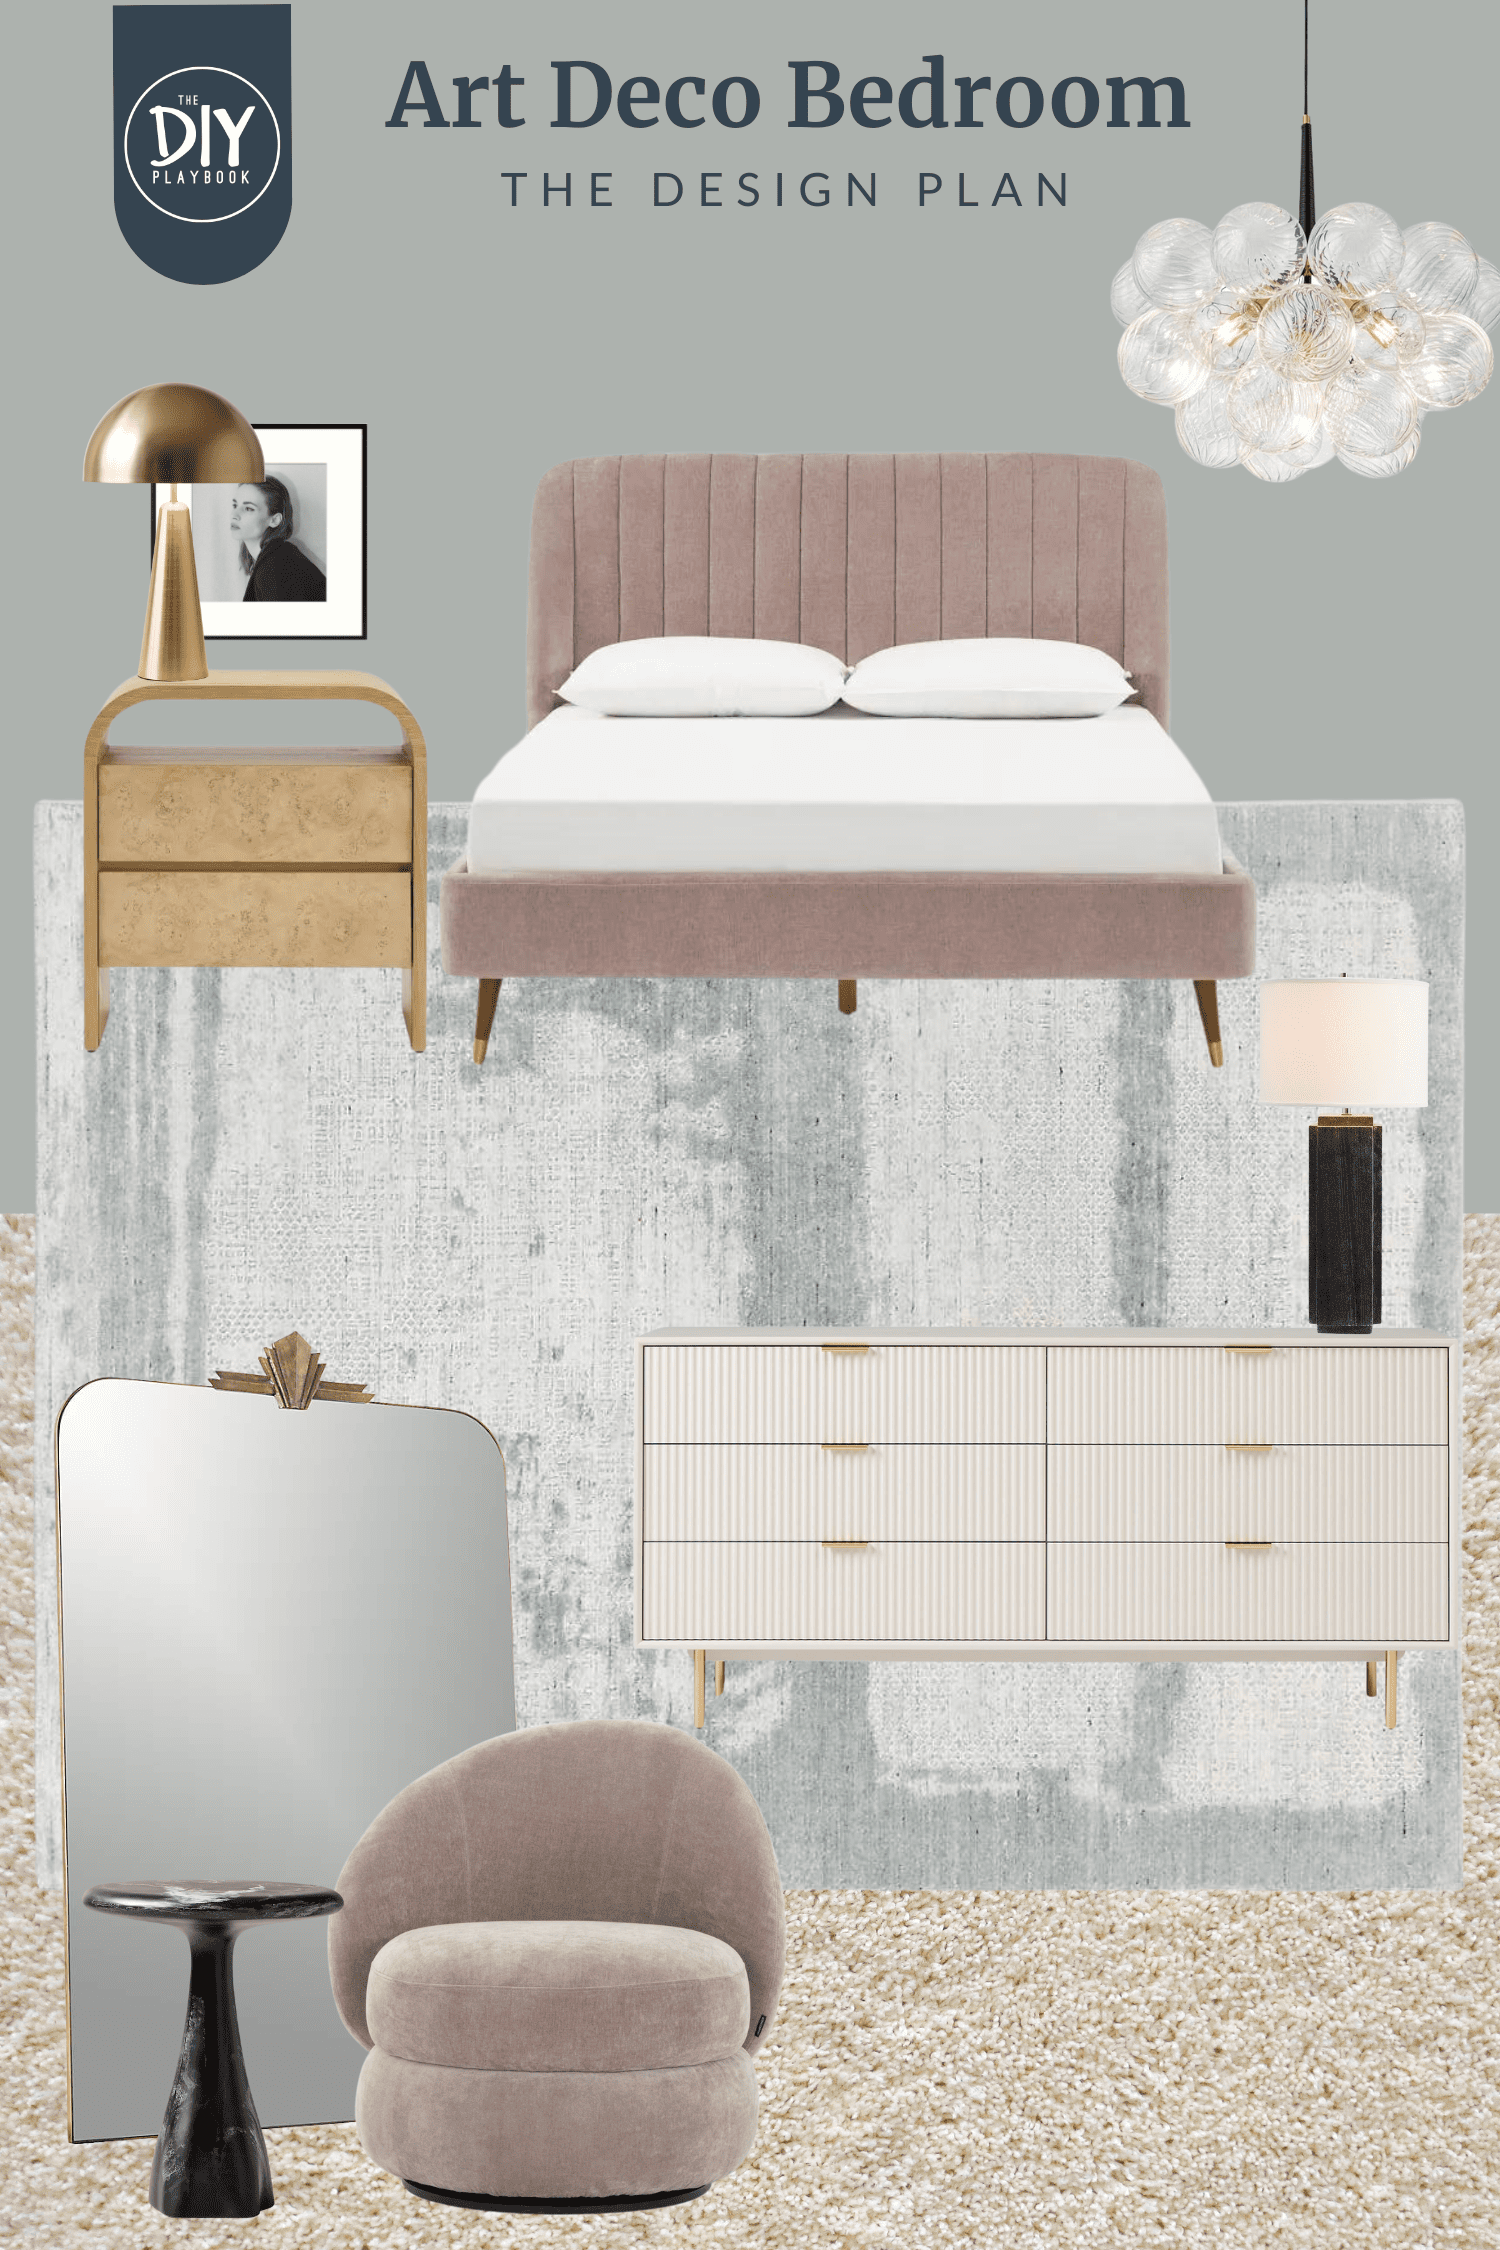 Designing an art deco bedroom with swanky and glamorous style